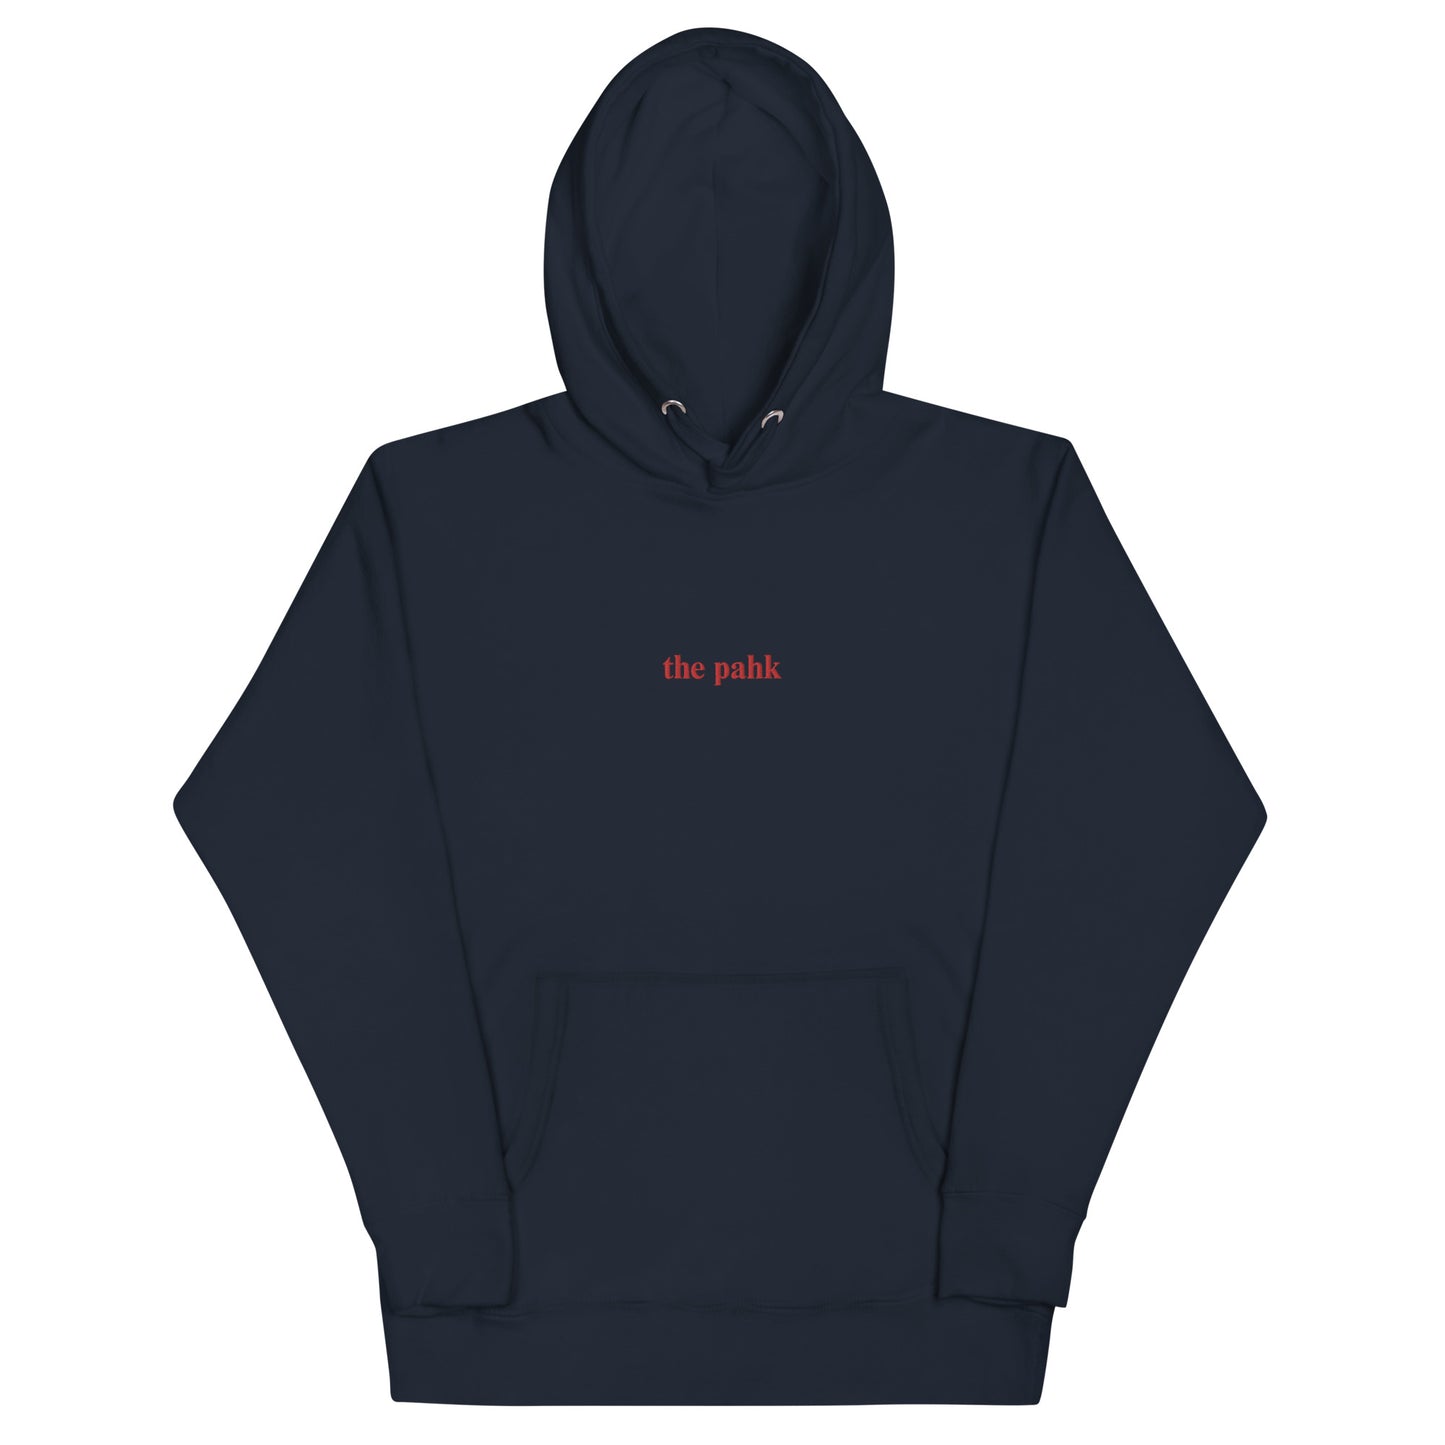 navy blue hoodie that says "the pahk" in red embroidery